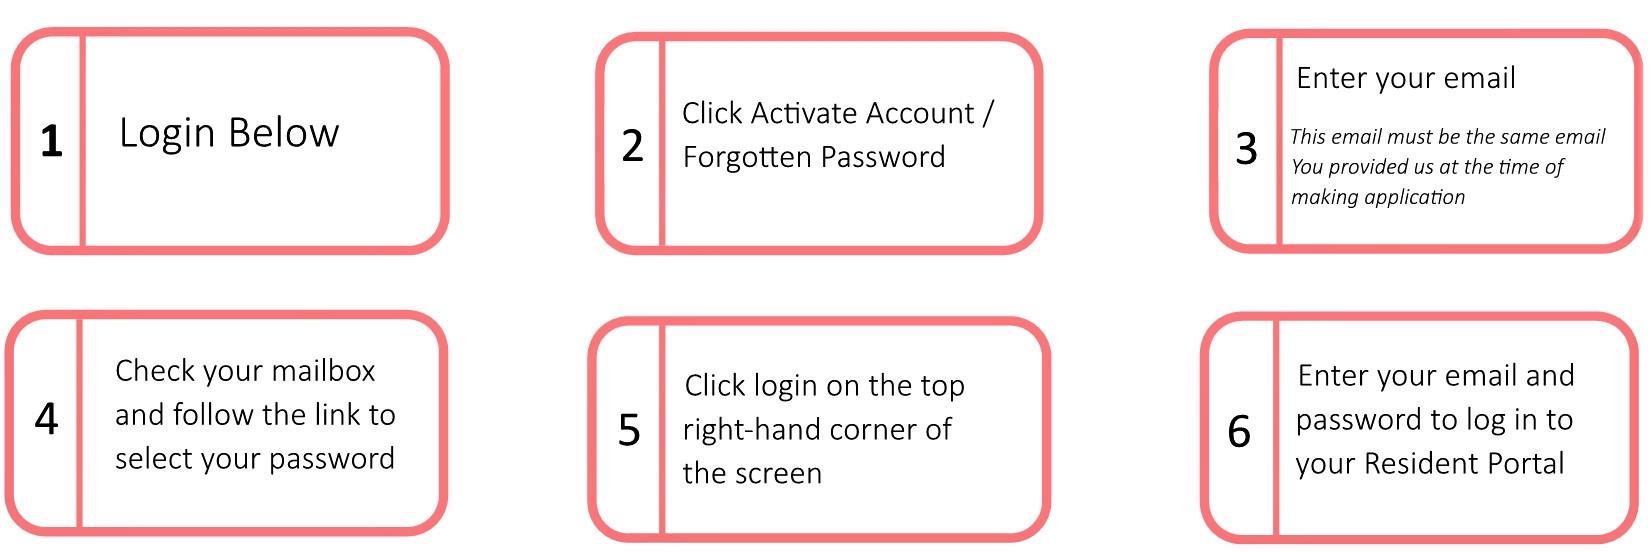 Steps to Login Overview